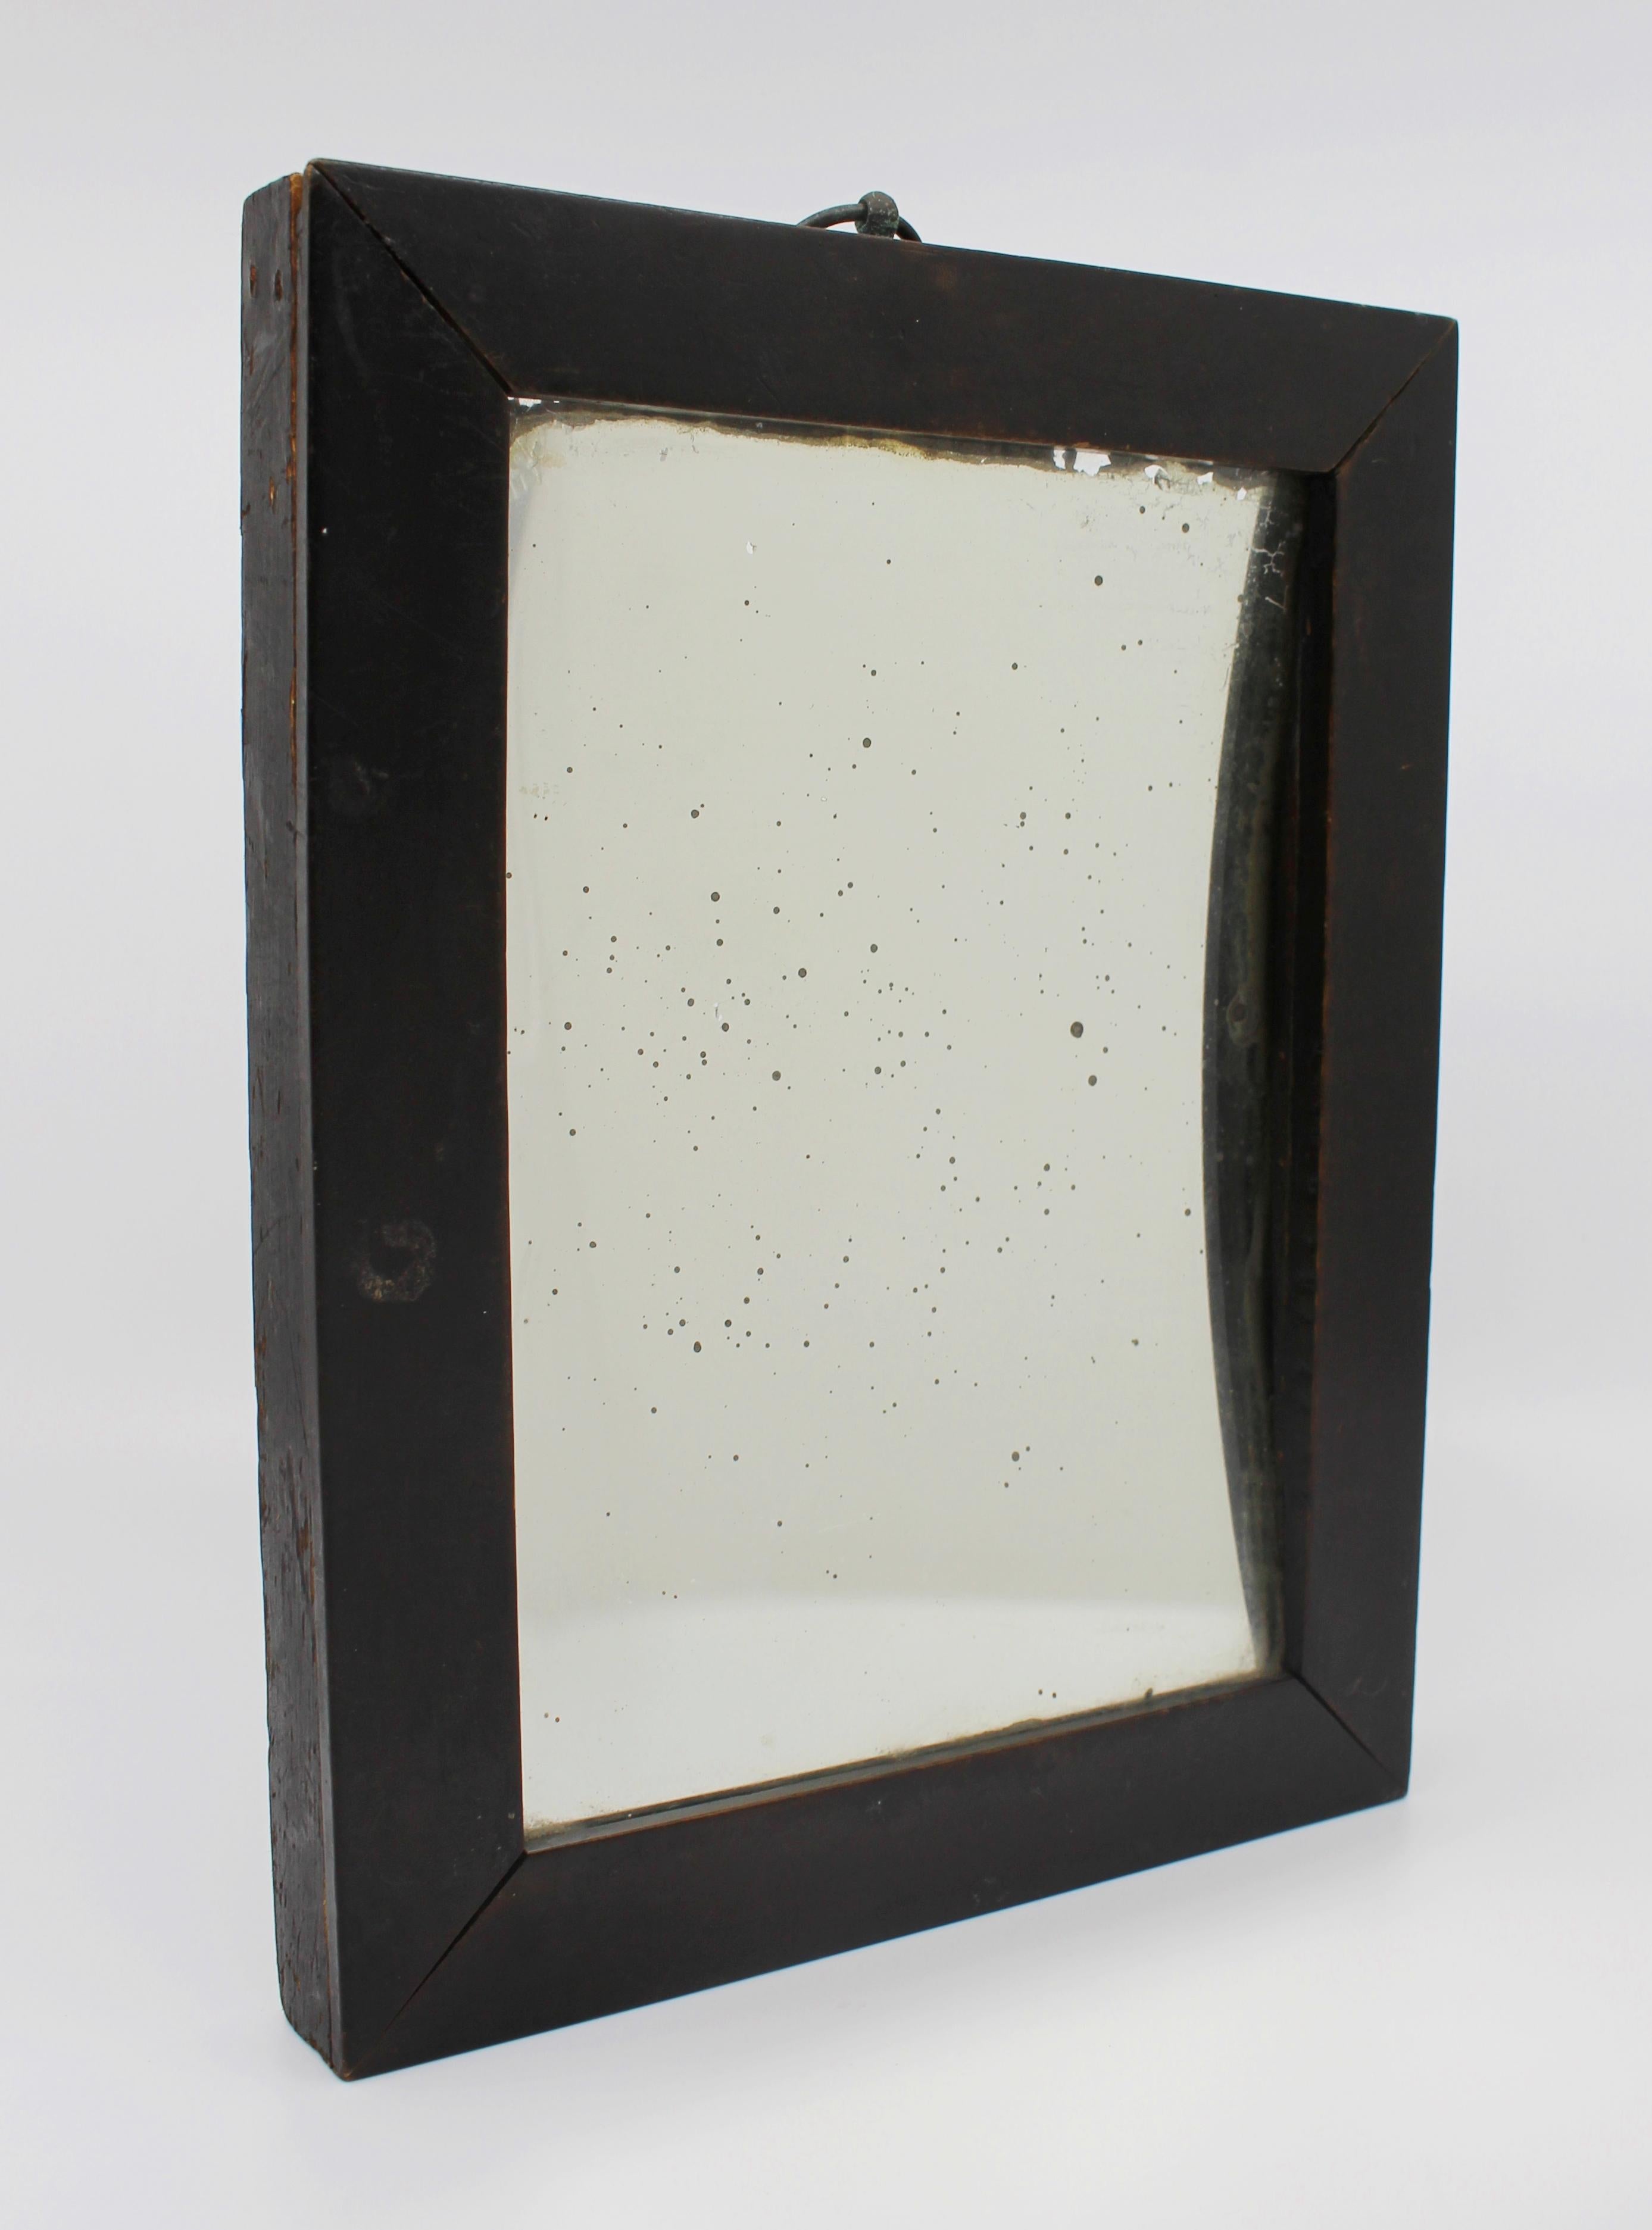 

 

Width 18 cm 7 in
Height 23 cm 9 in
 

 

Period 18th c., early Georgian, English
Frame Rosewood
Mirror Original concaved glass
Condition Offered in very good original condition. Some light wear to frame commensurate with age, and